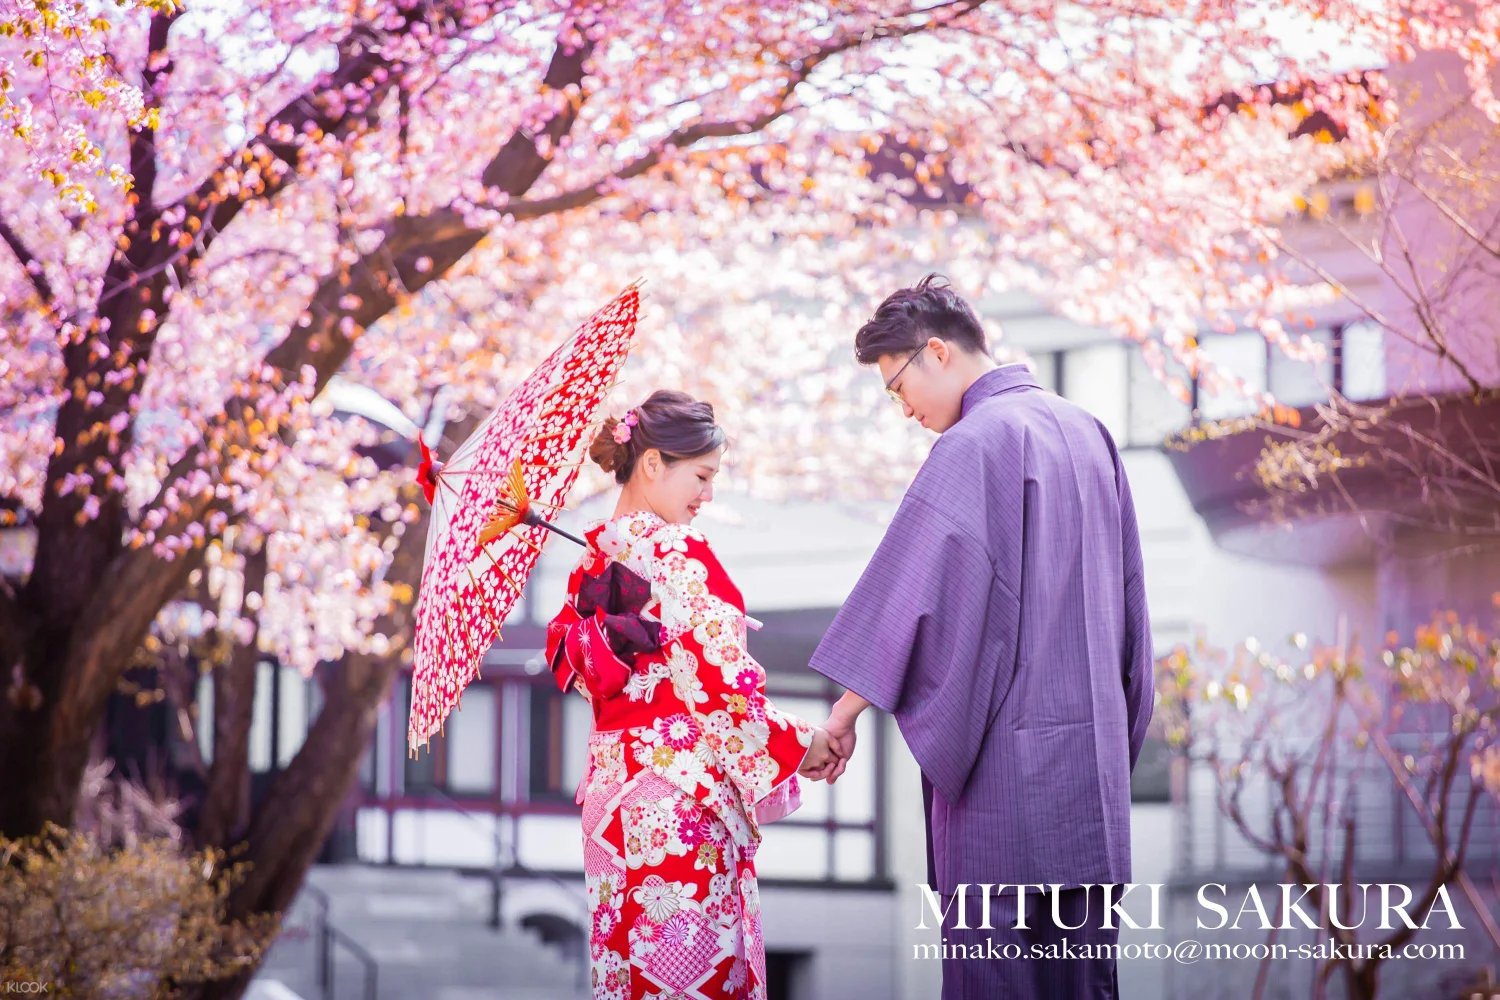 Immerse yourself in the Japanese culture by dressing up in traditional clothing while walking around Sapporo